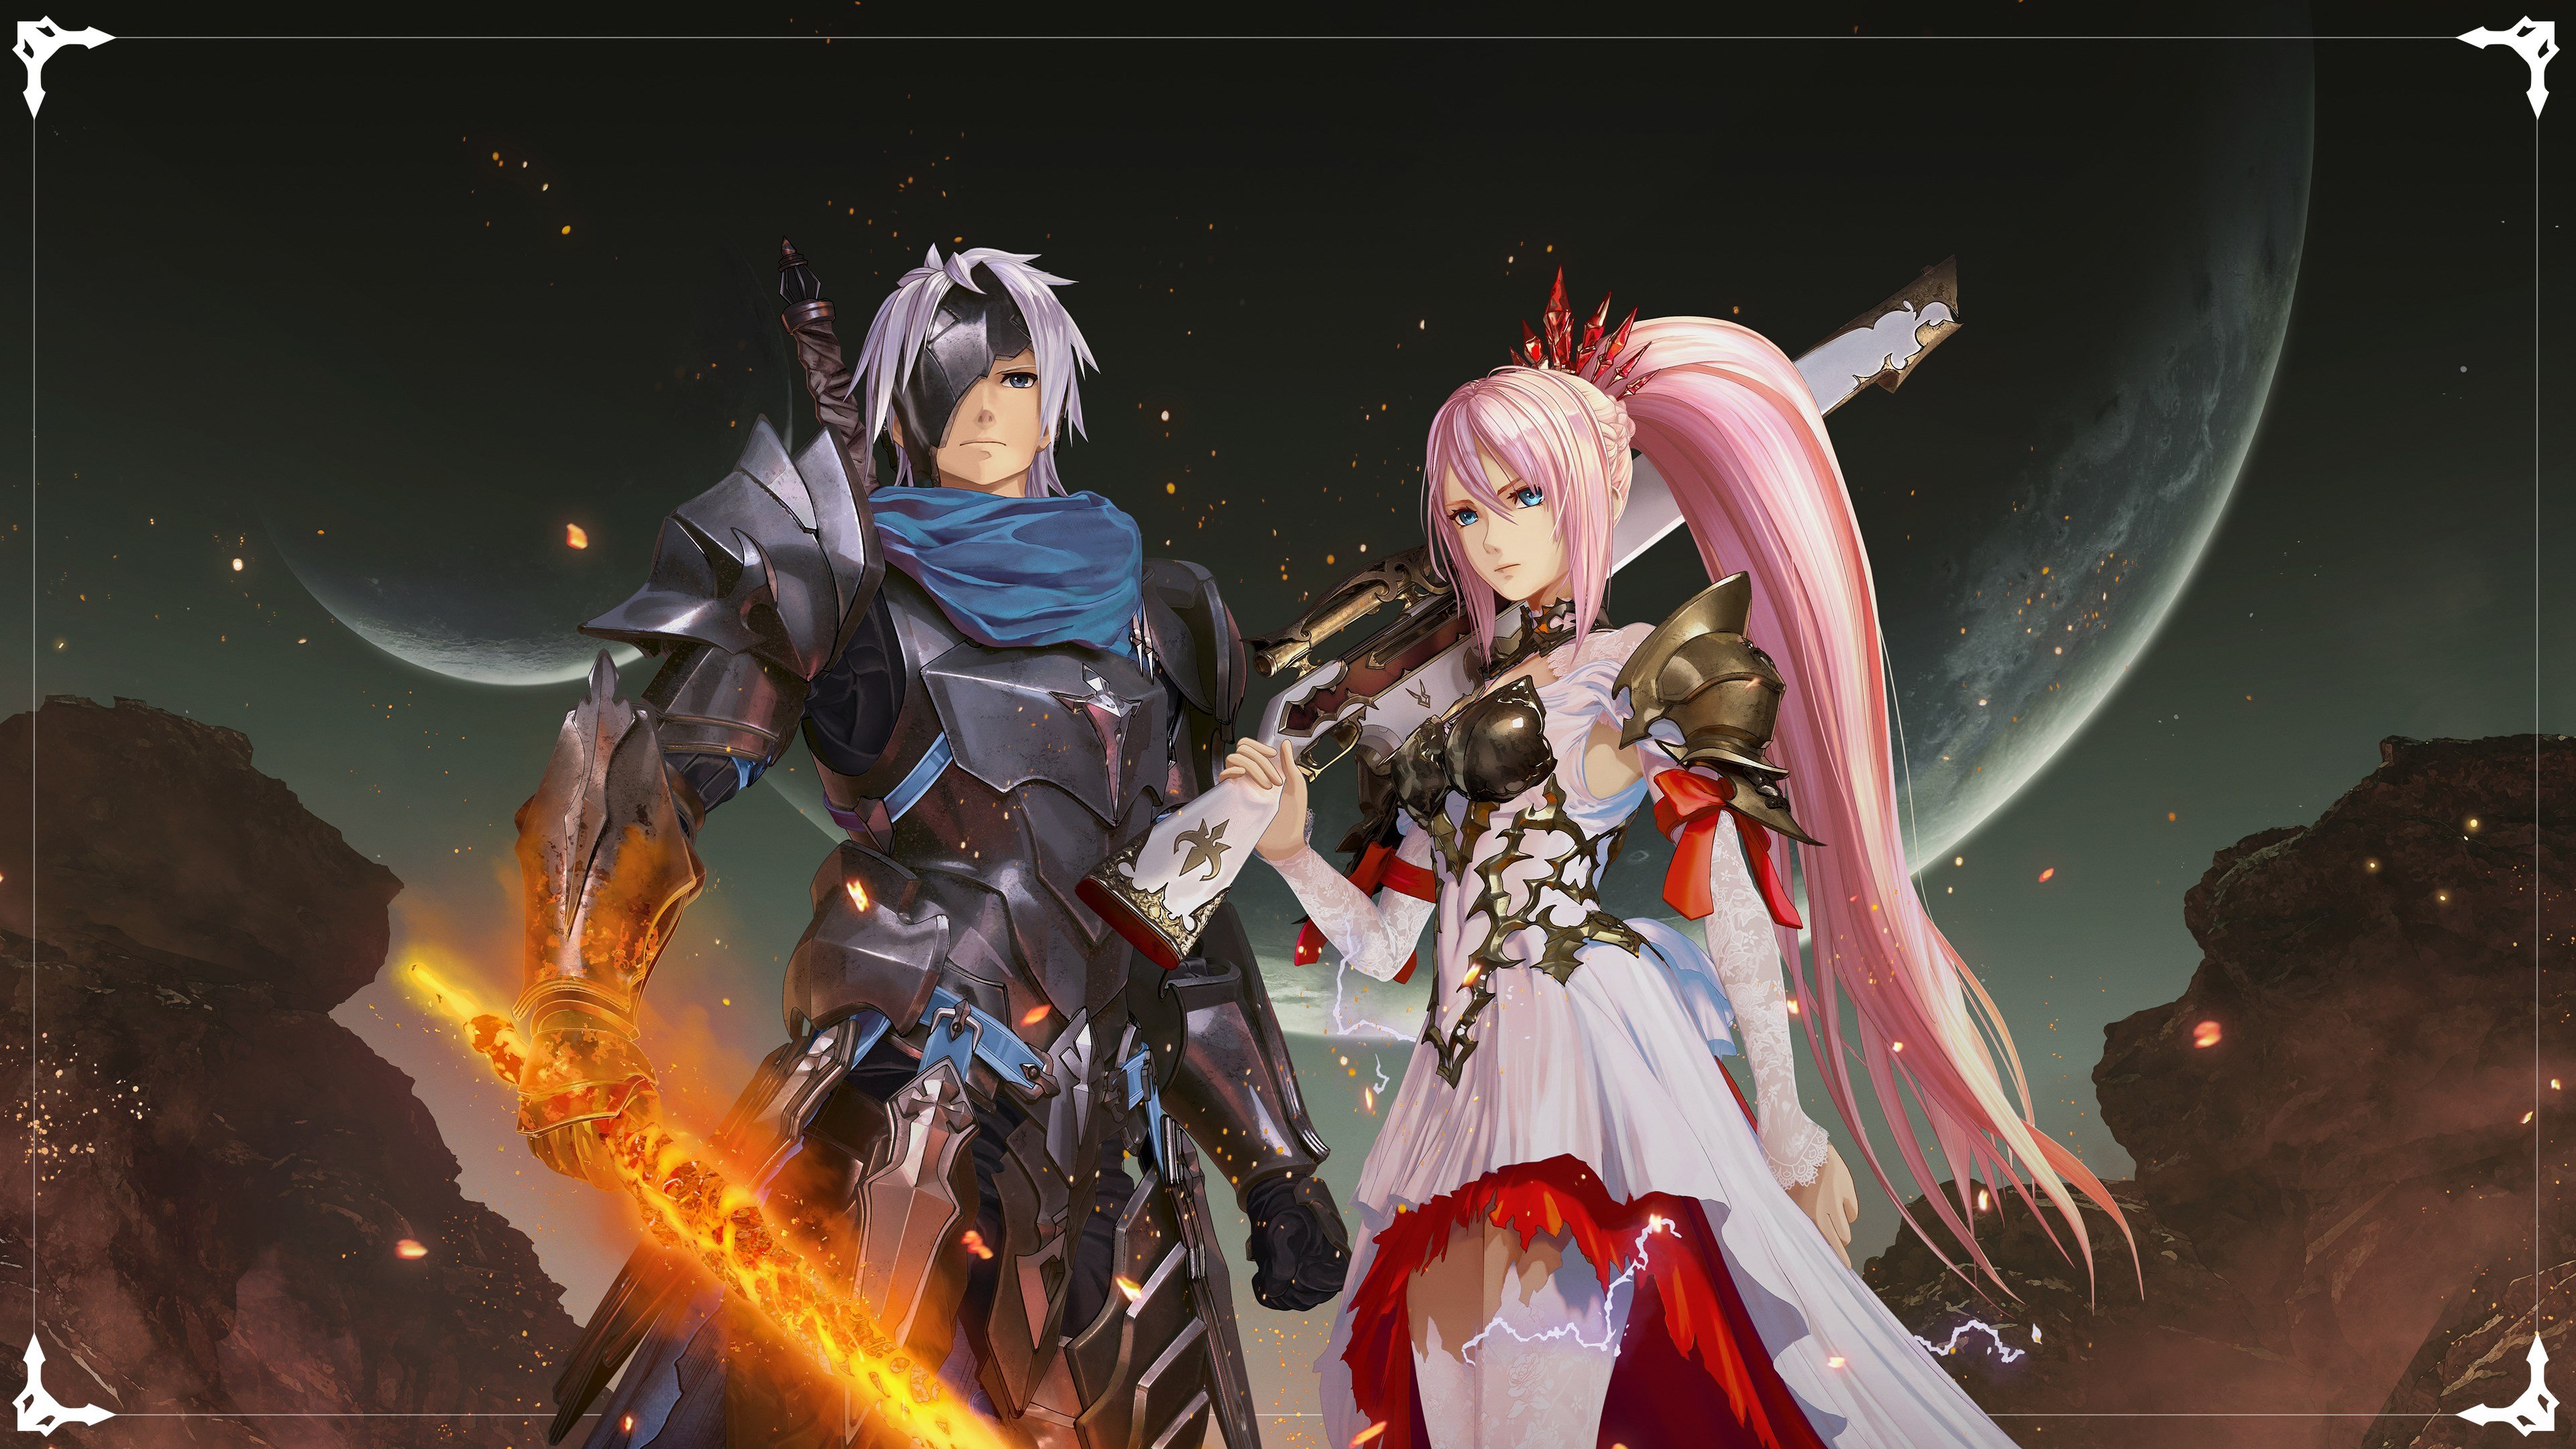 Tales of Arise cover image